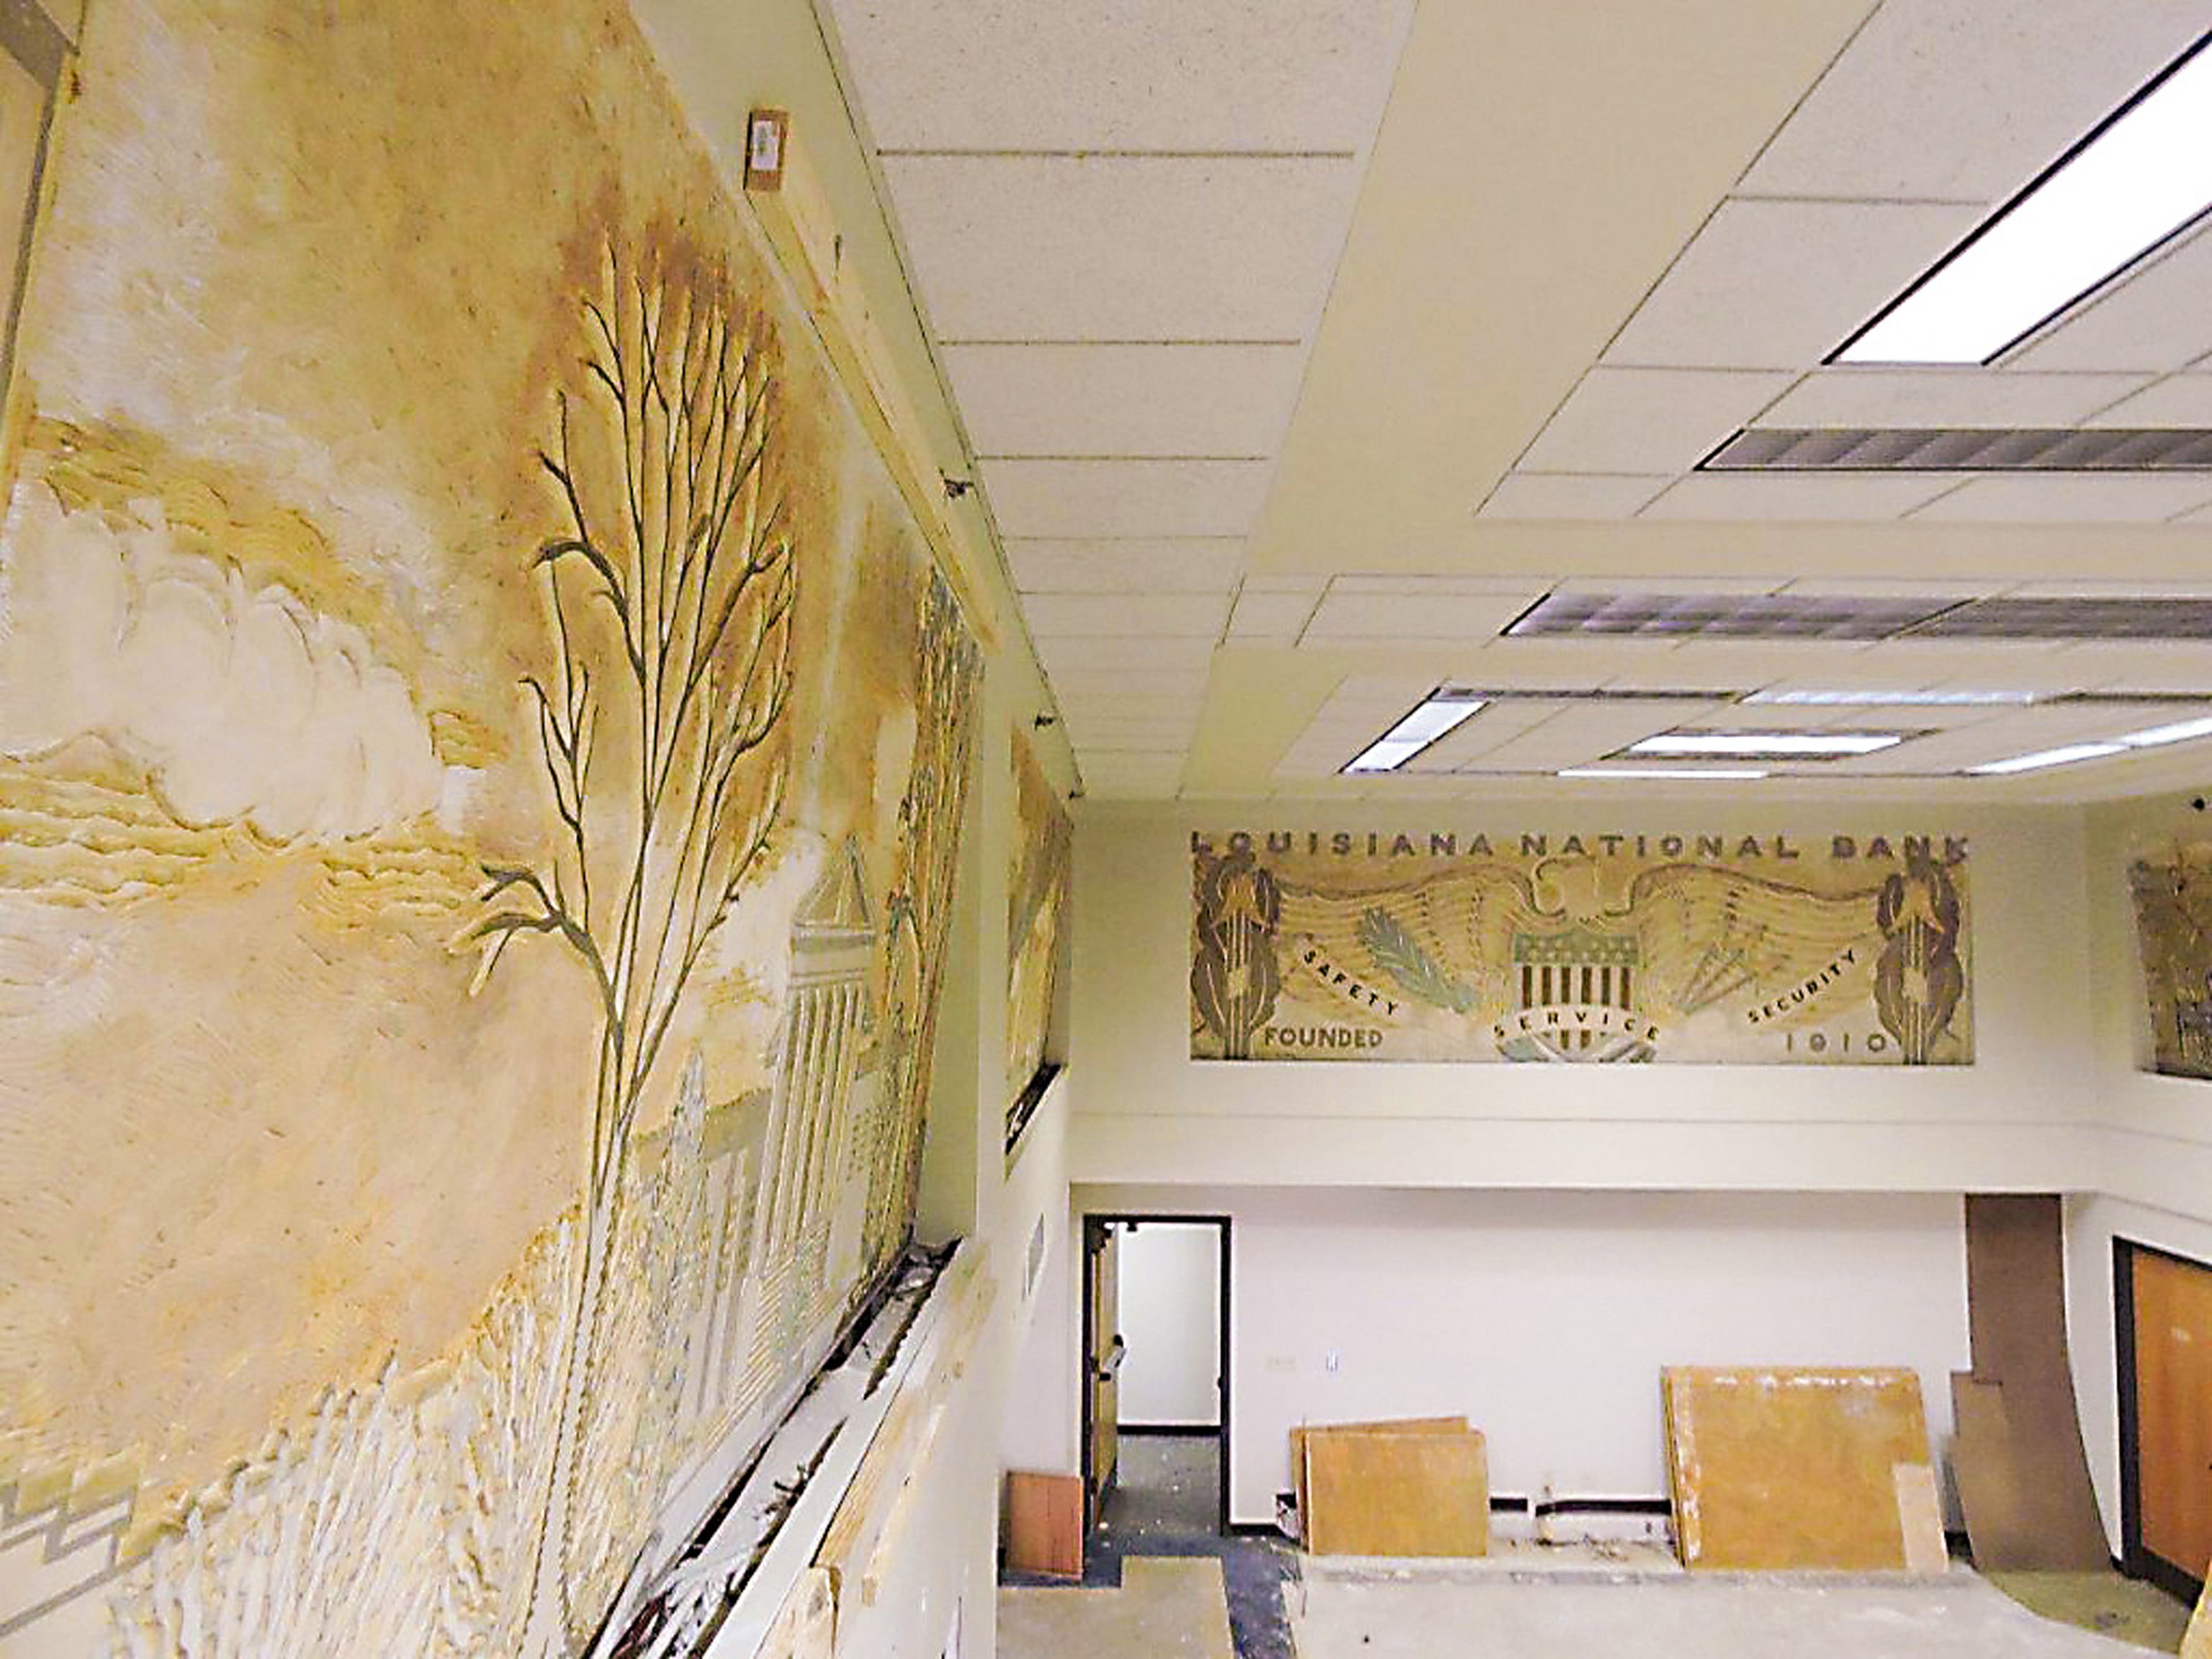 Prior to reconstruction of the building, it was noted that some of the murals had moisture damage and had deteriorated over time. Courtesy Watermark Hotel.